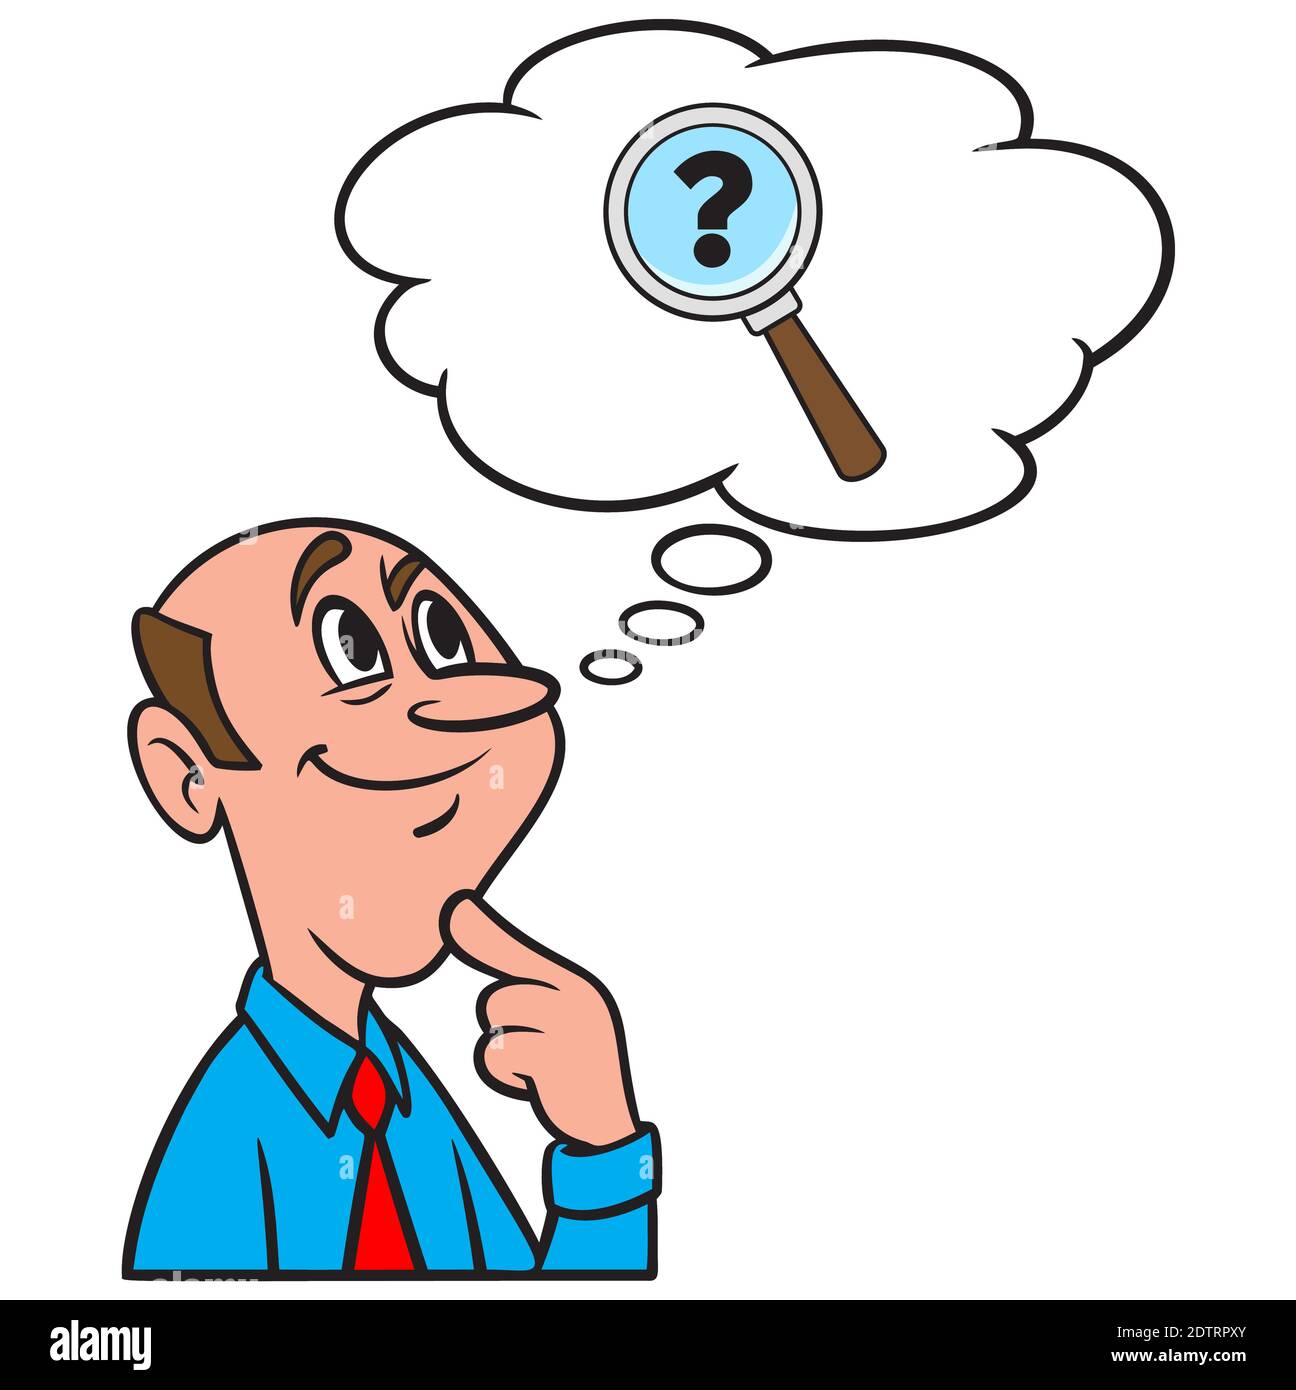 Thinking about an Unsolved Mystery - A cartoon illustration of a man thinking about an Unsolved Mystery. Stock Vector